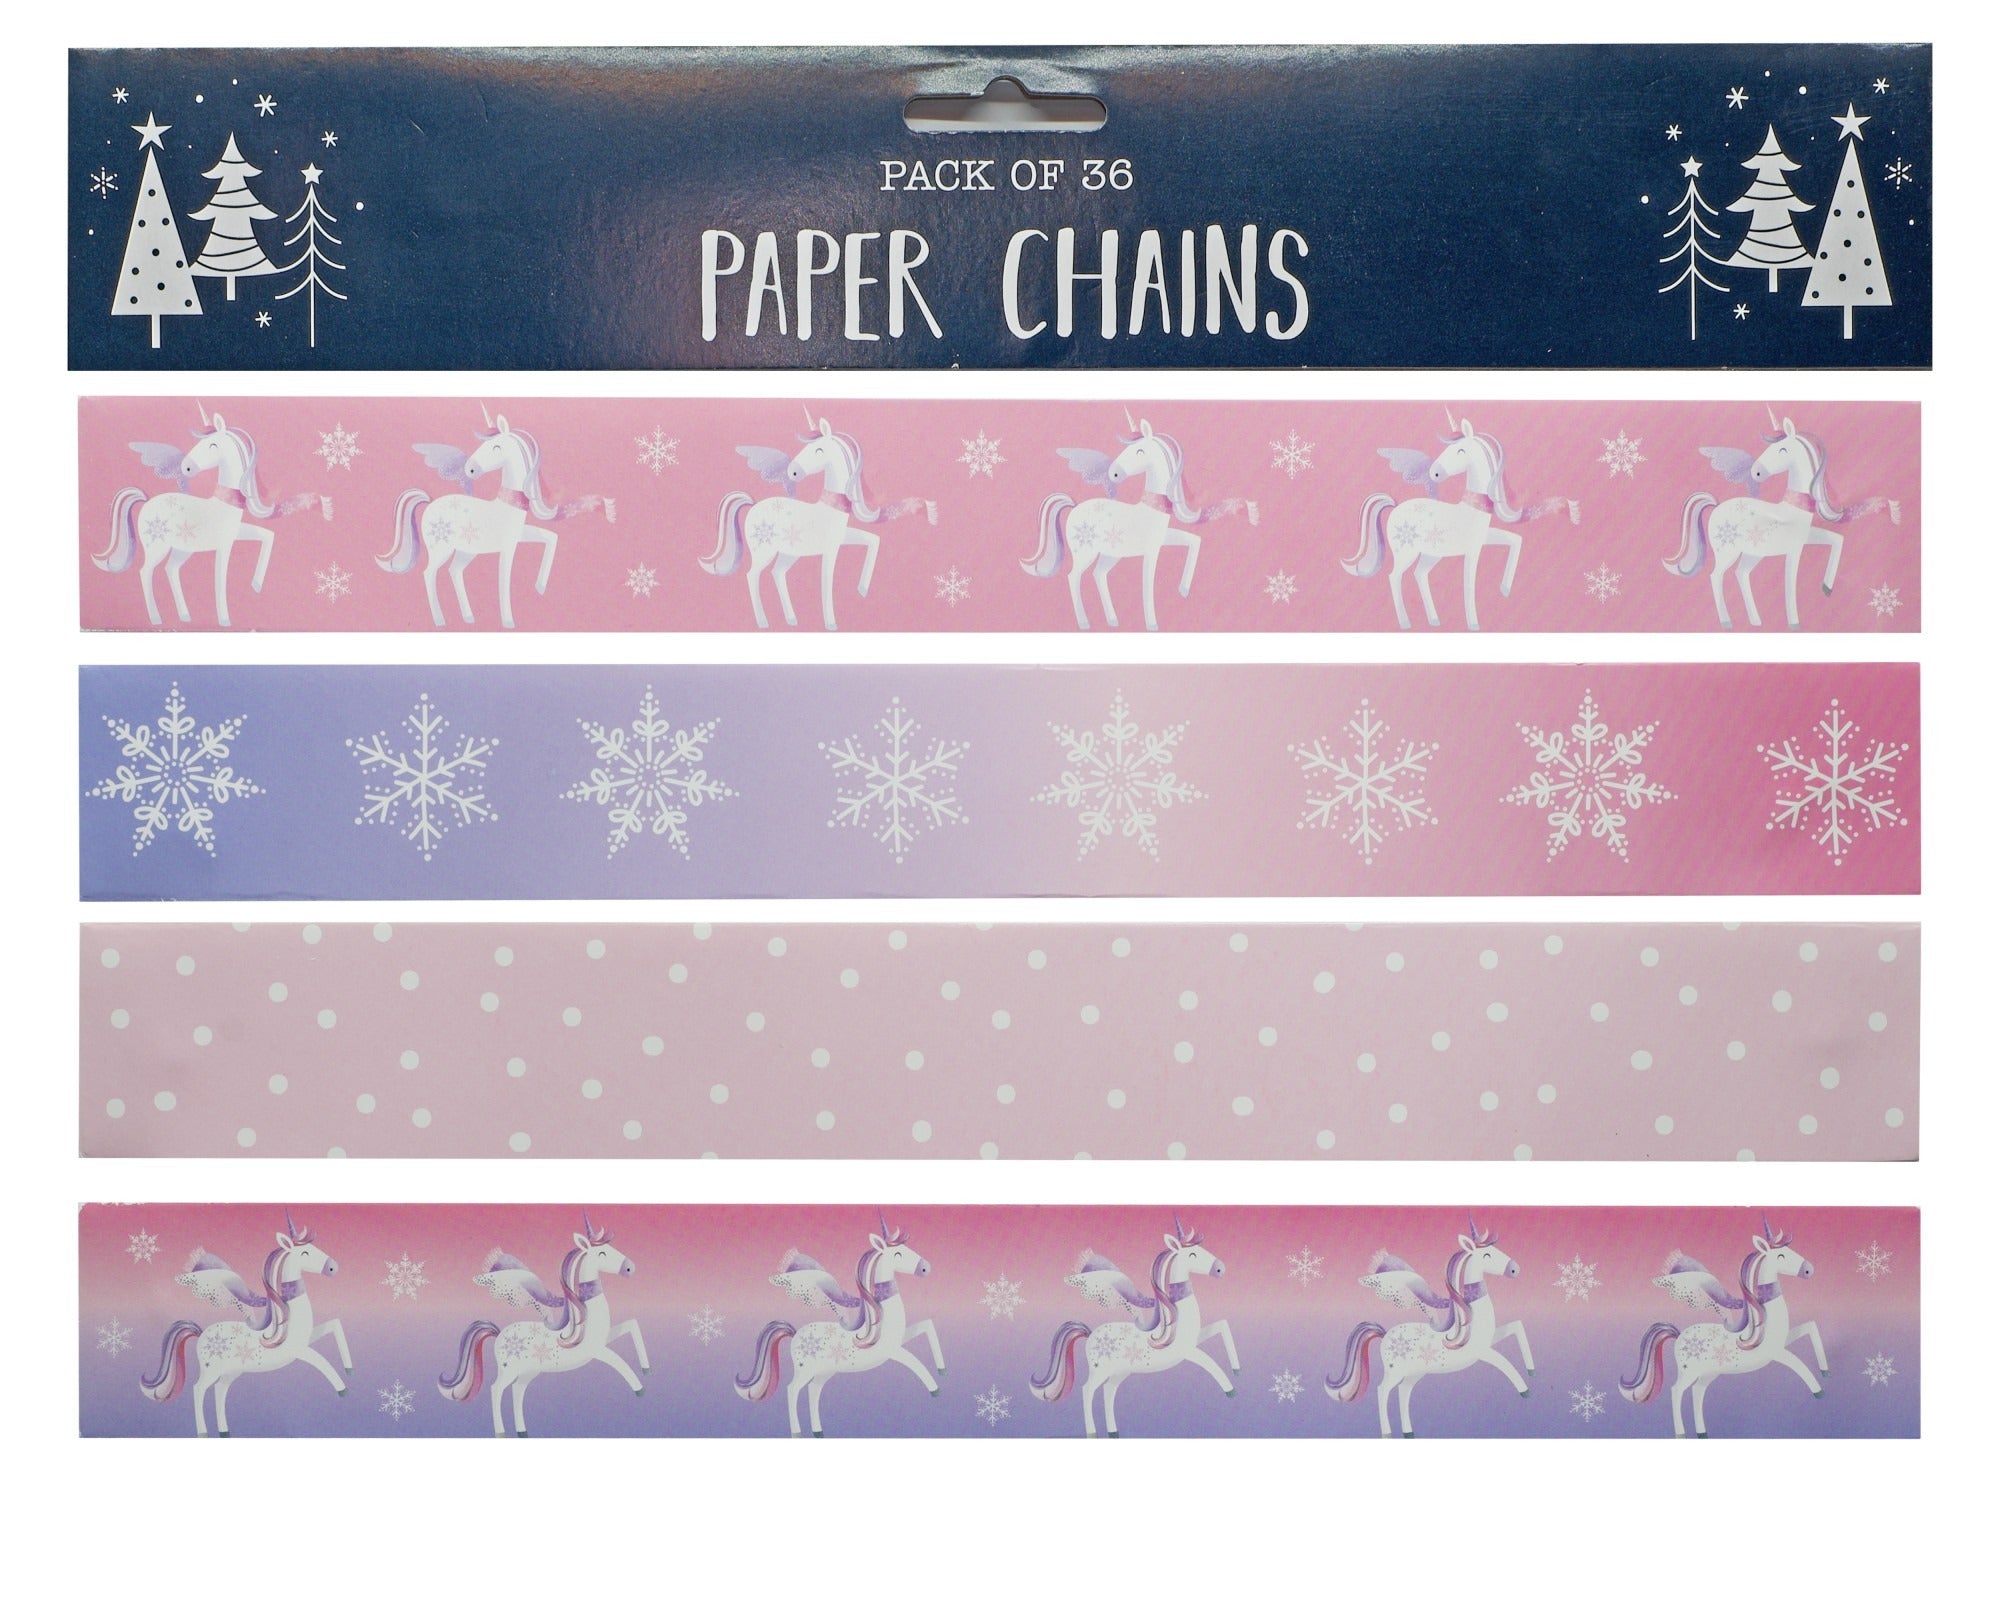 View Unicorn 36 Paper Chains information